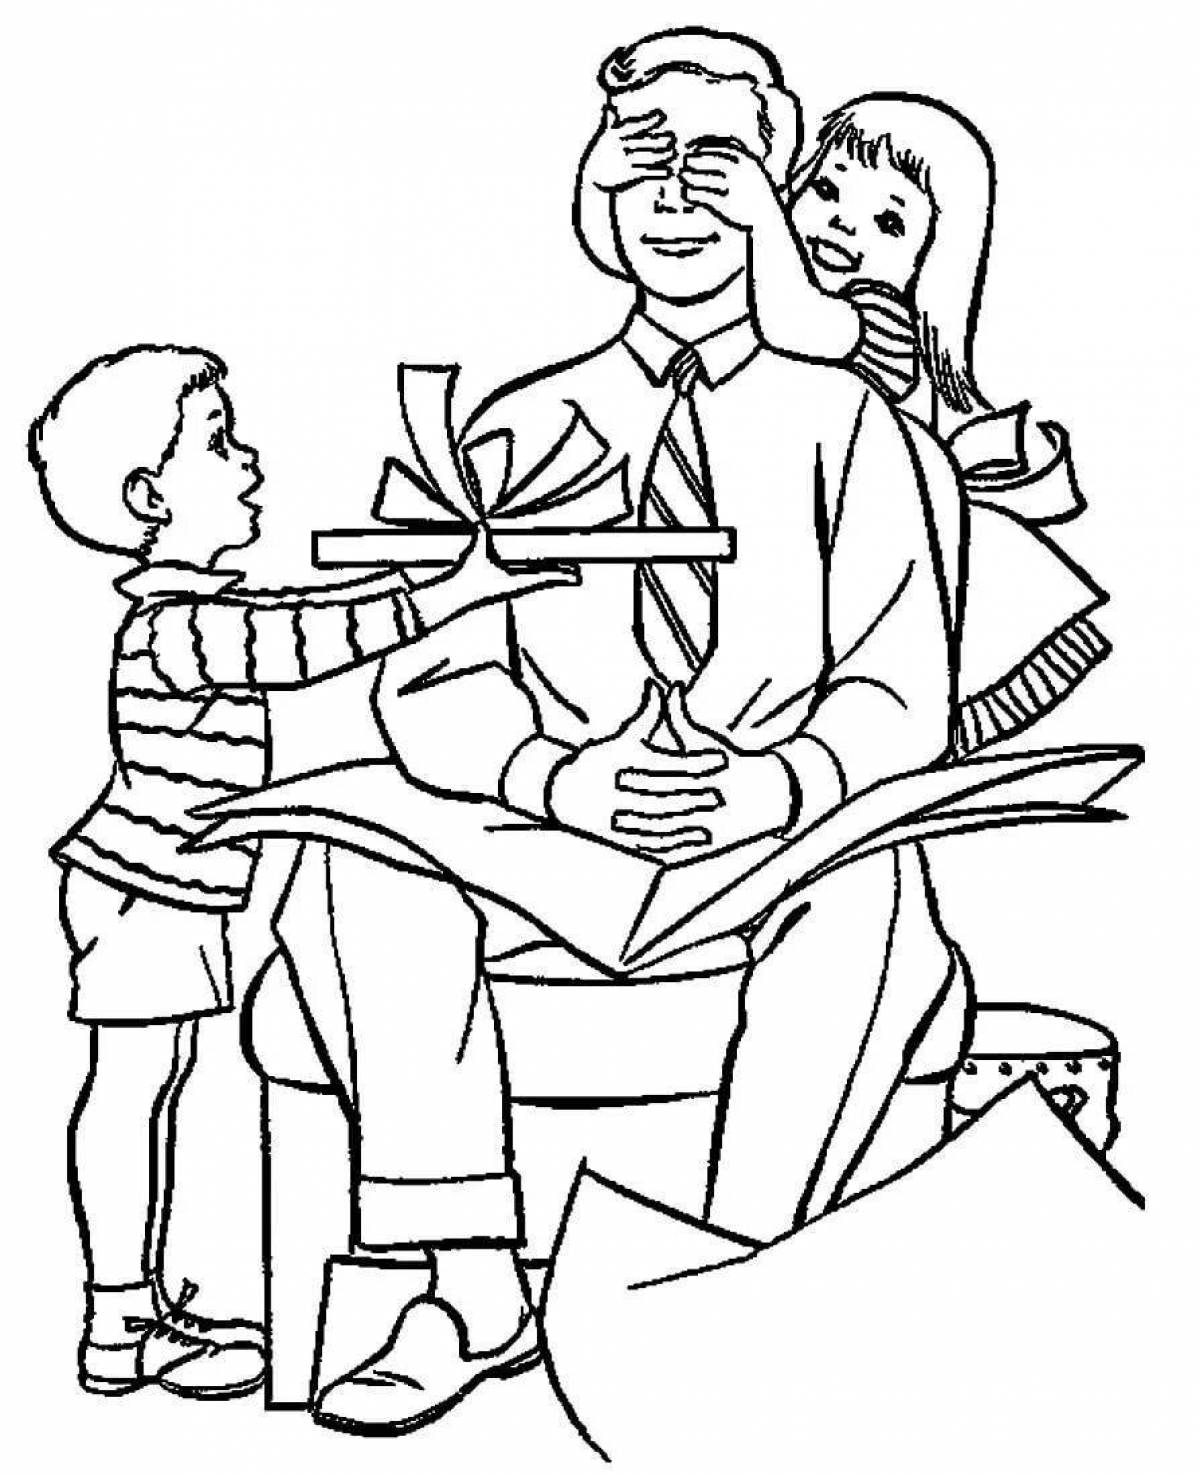 Coloring pages happy birthday, dad, coloring pages for kids